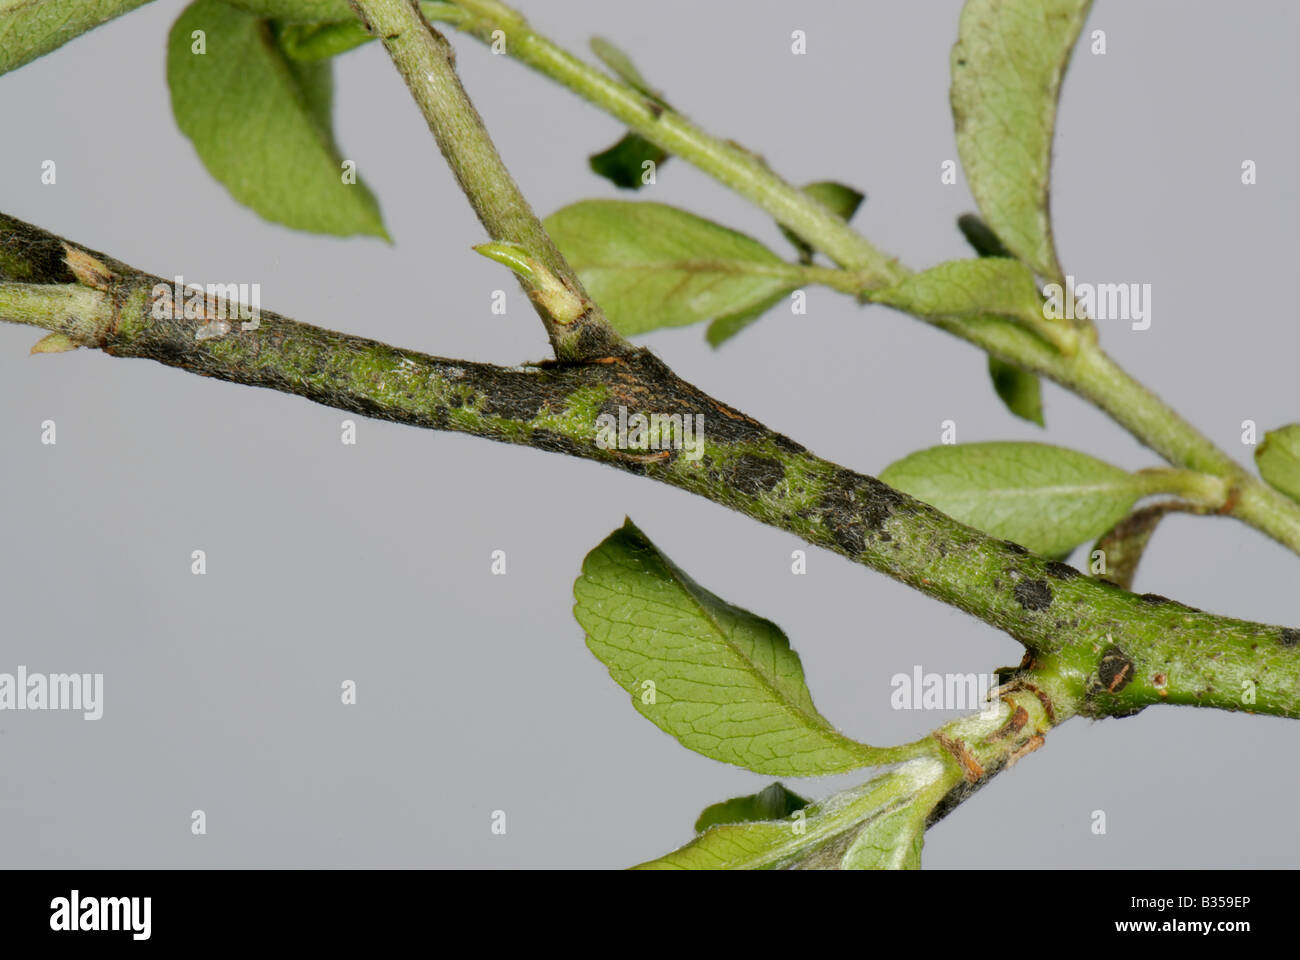 Scab Venturia inaequalis development of disease on the upper surface of a Pyracantha stem leaves Stock Photo